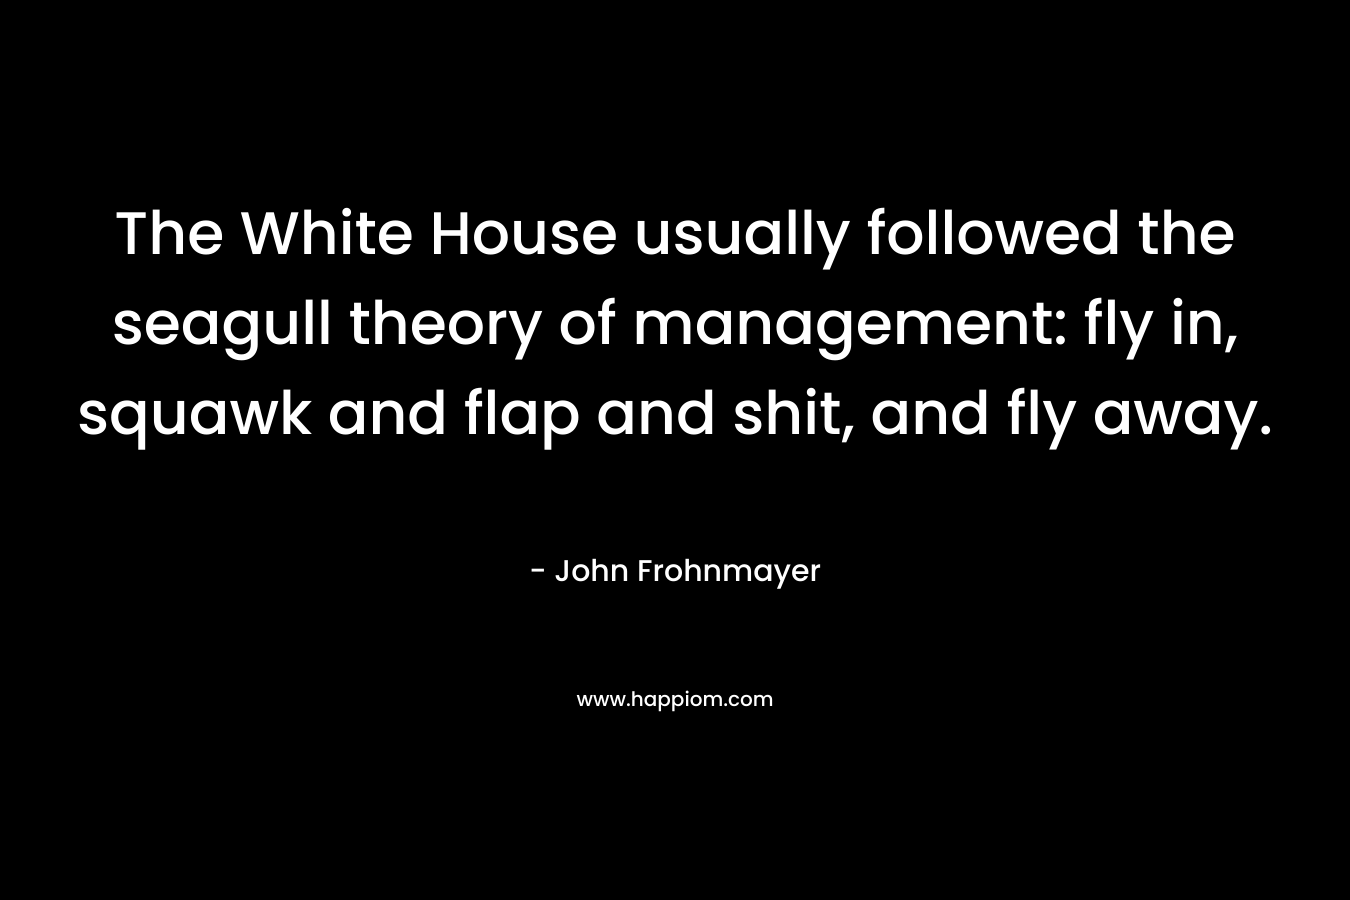 The White House usually followed the seagull theory of management: fly in, squawk and flap and shit, and fly away. – John Frohnmayer